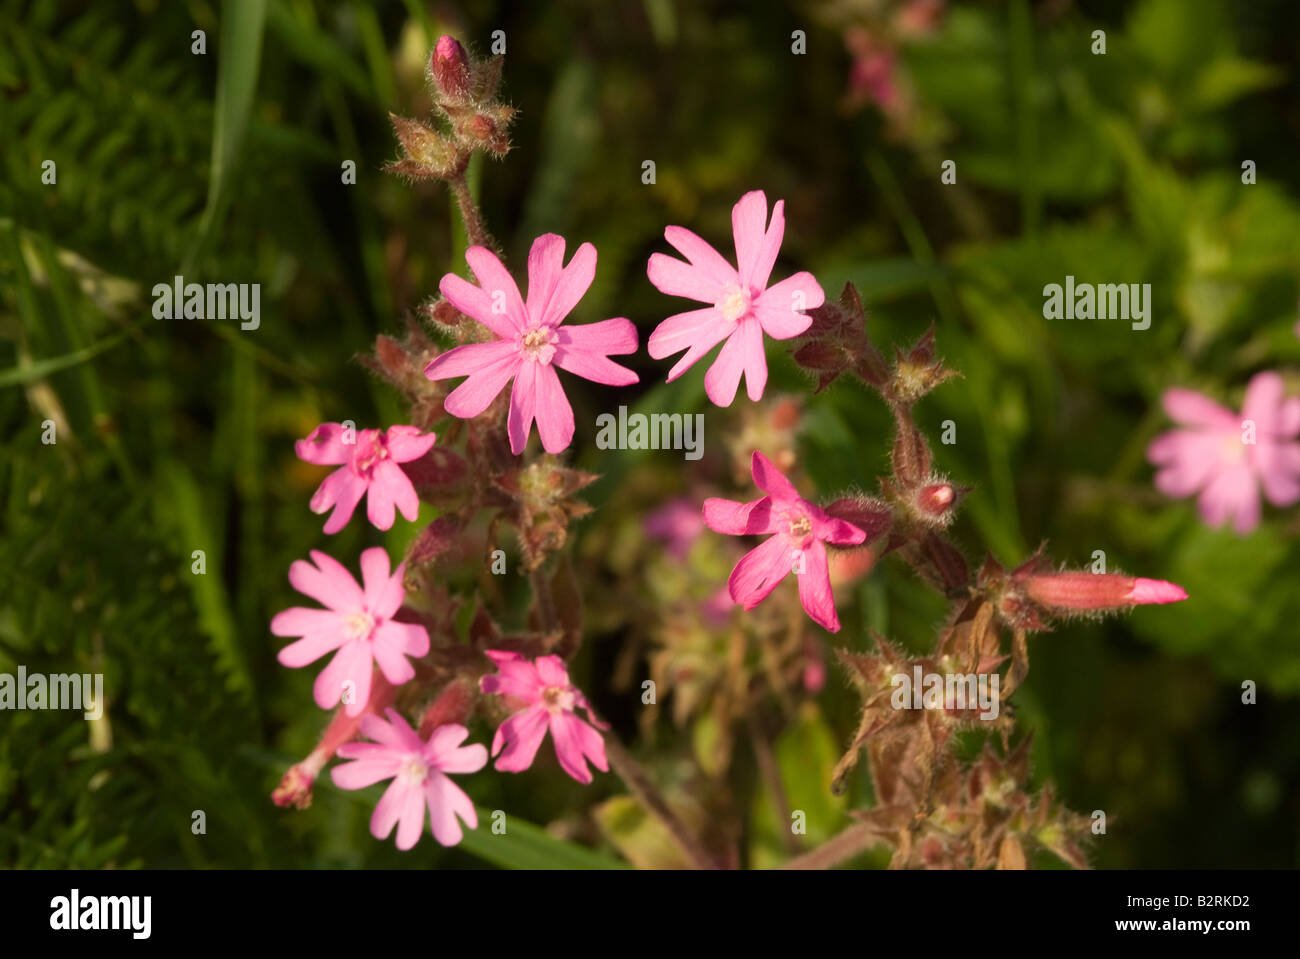 A Clump of Wild Red Campion Flowers in a Hedgerow near Carrick Dumfries and Galloway Scotland United Kingdom Stock Photo